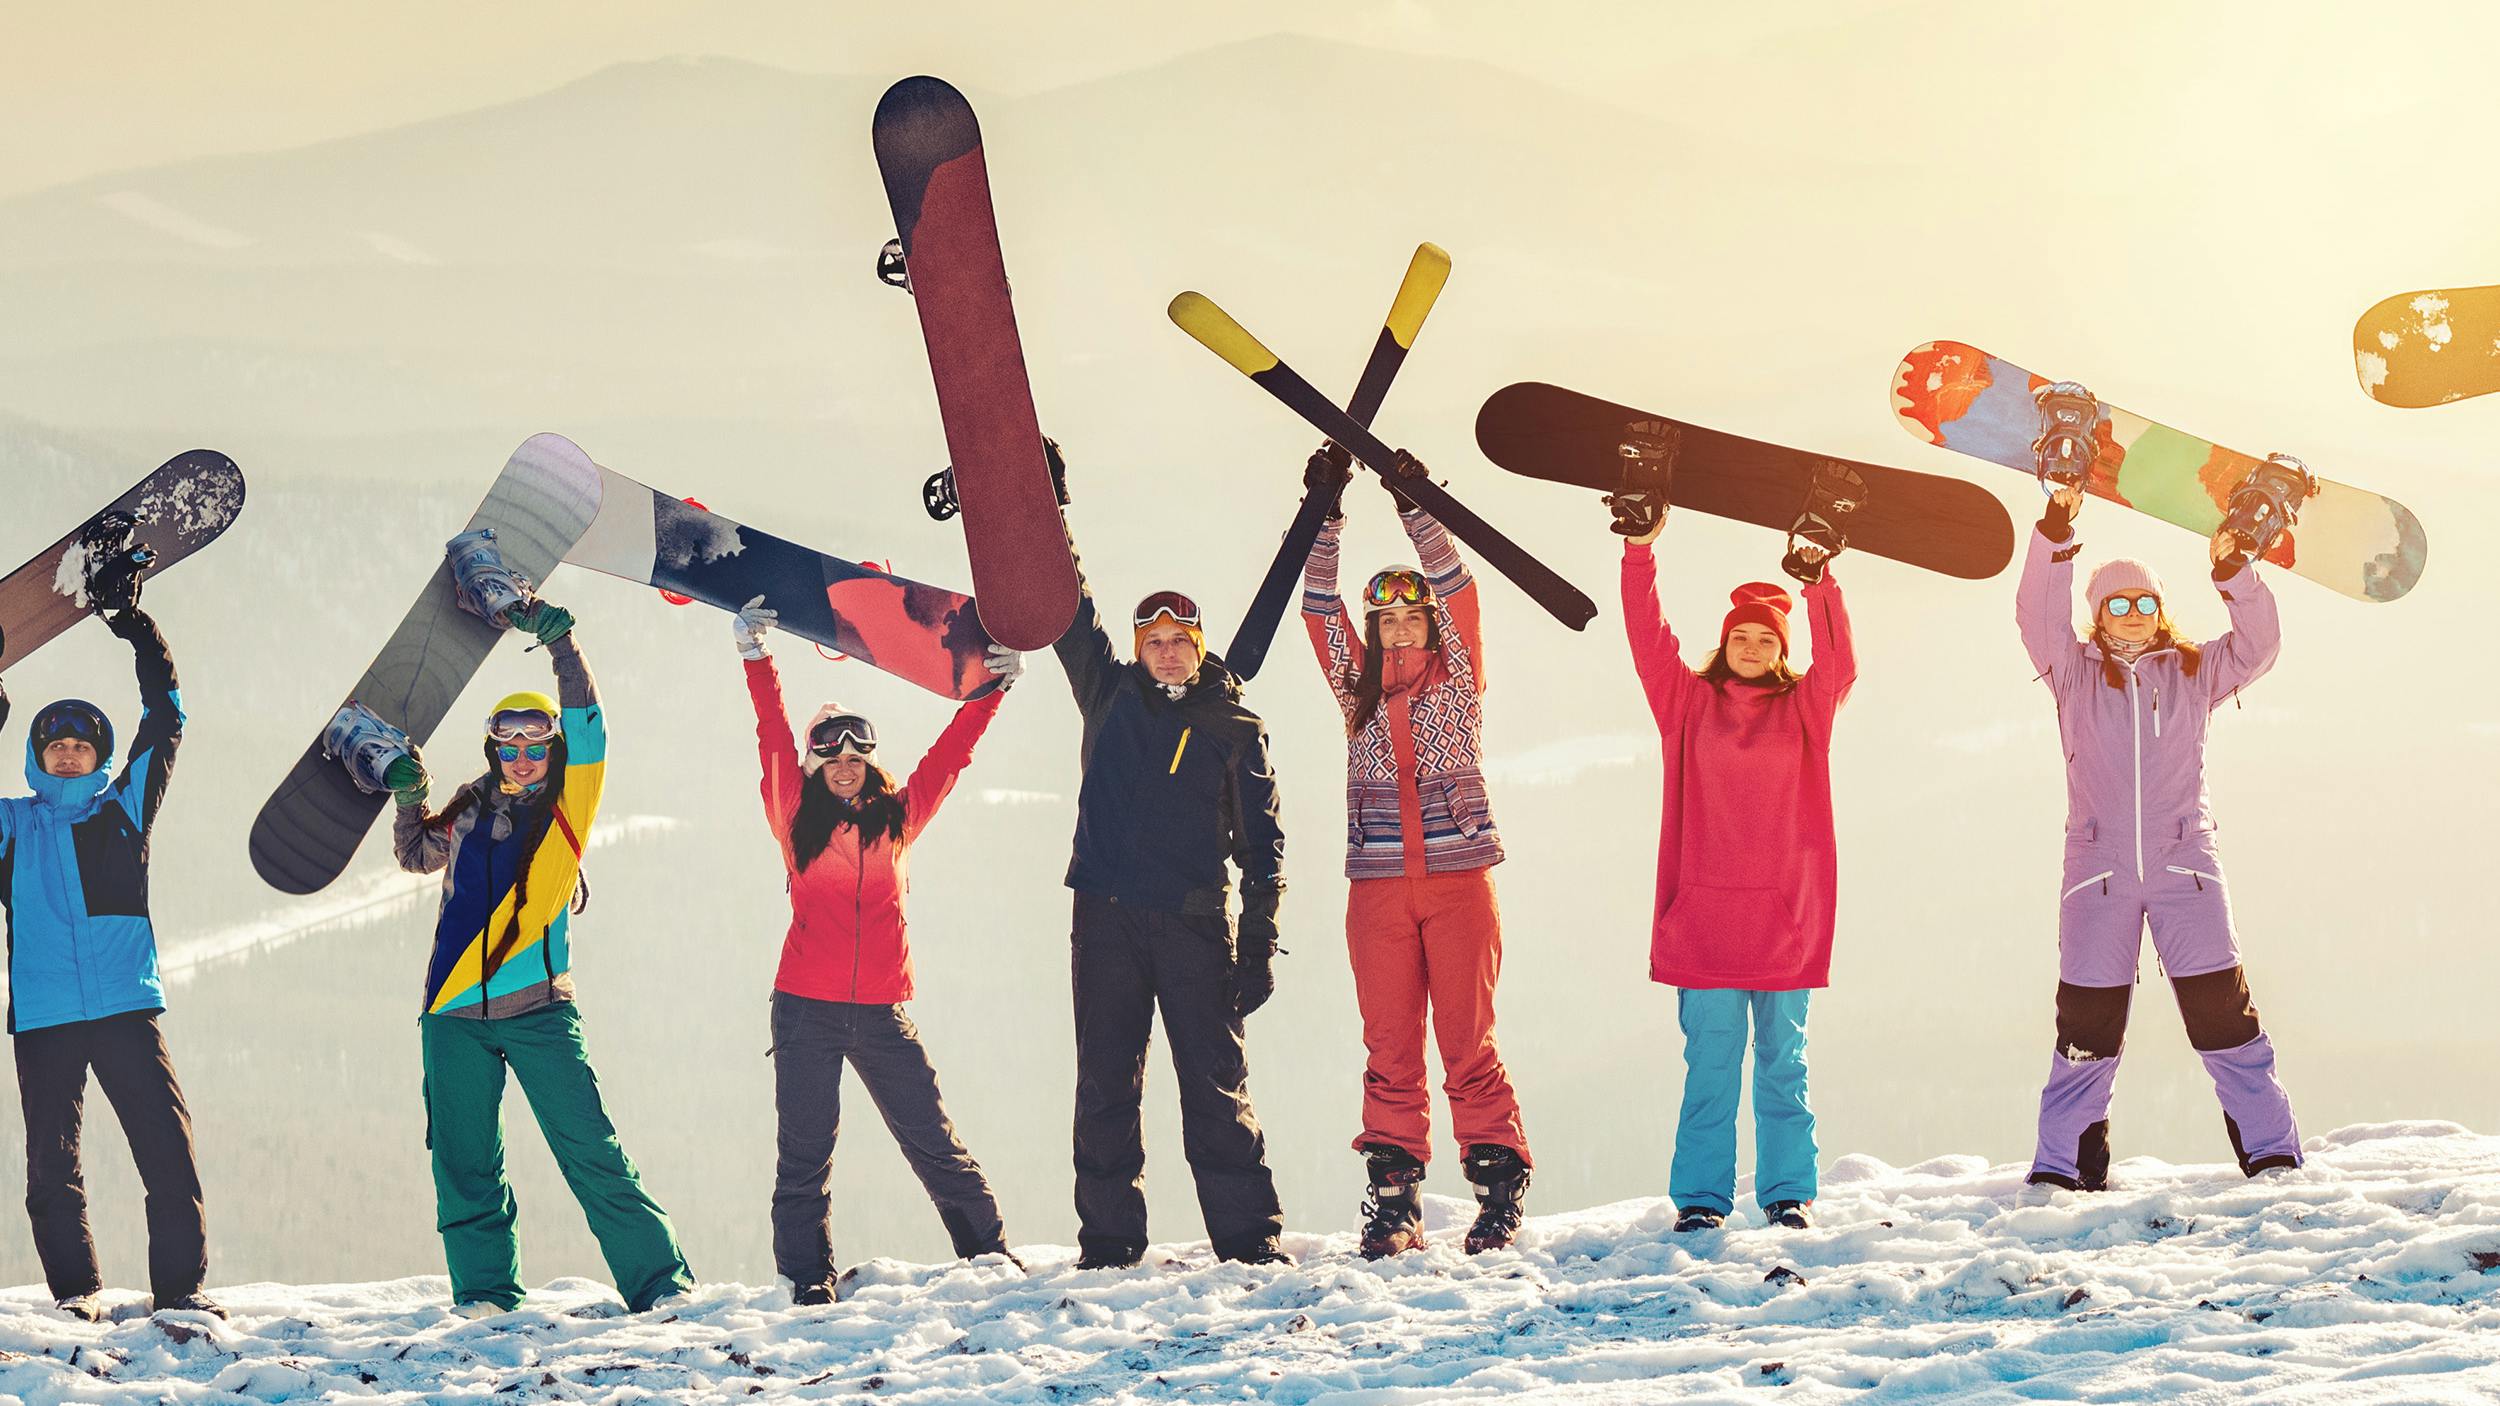 Several snowboarders wearing different outfits stand at the top of a snowy mountain while holding their snowboards in the air. 